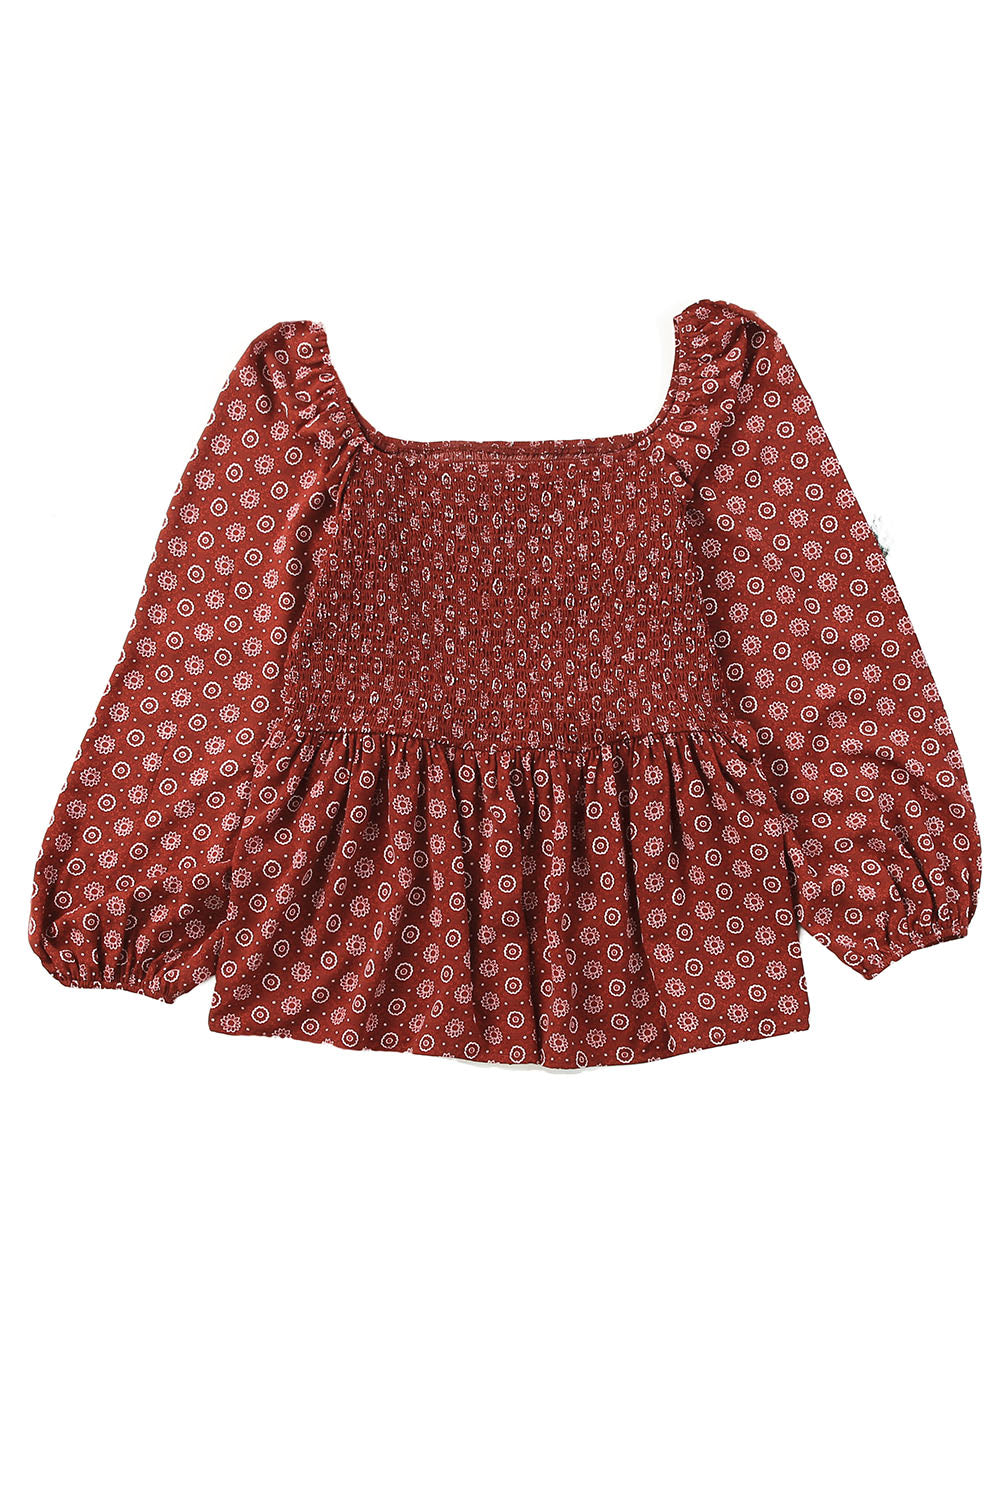 Fiery Red Plus Size Square Neck Printed Peplum Top